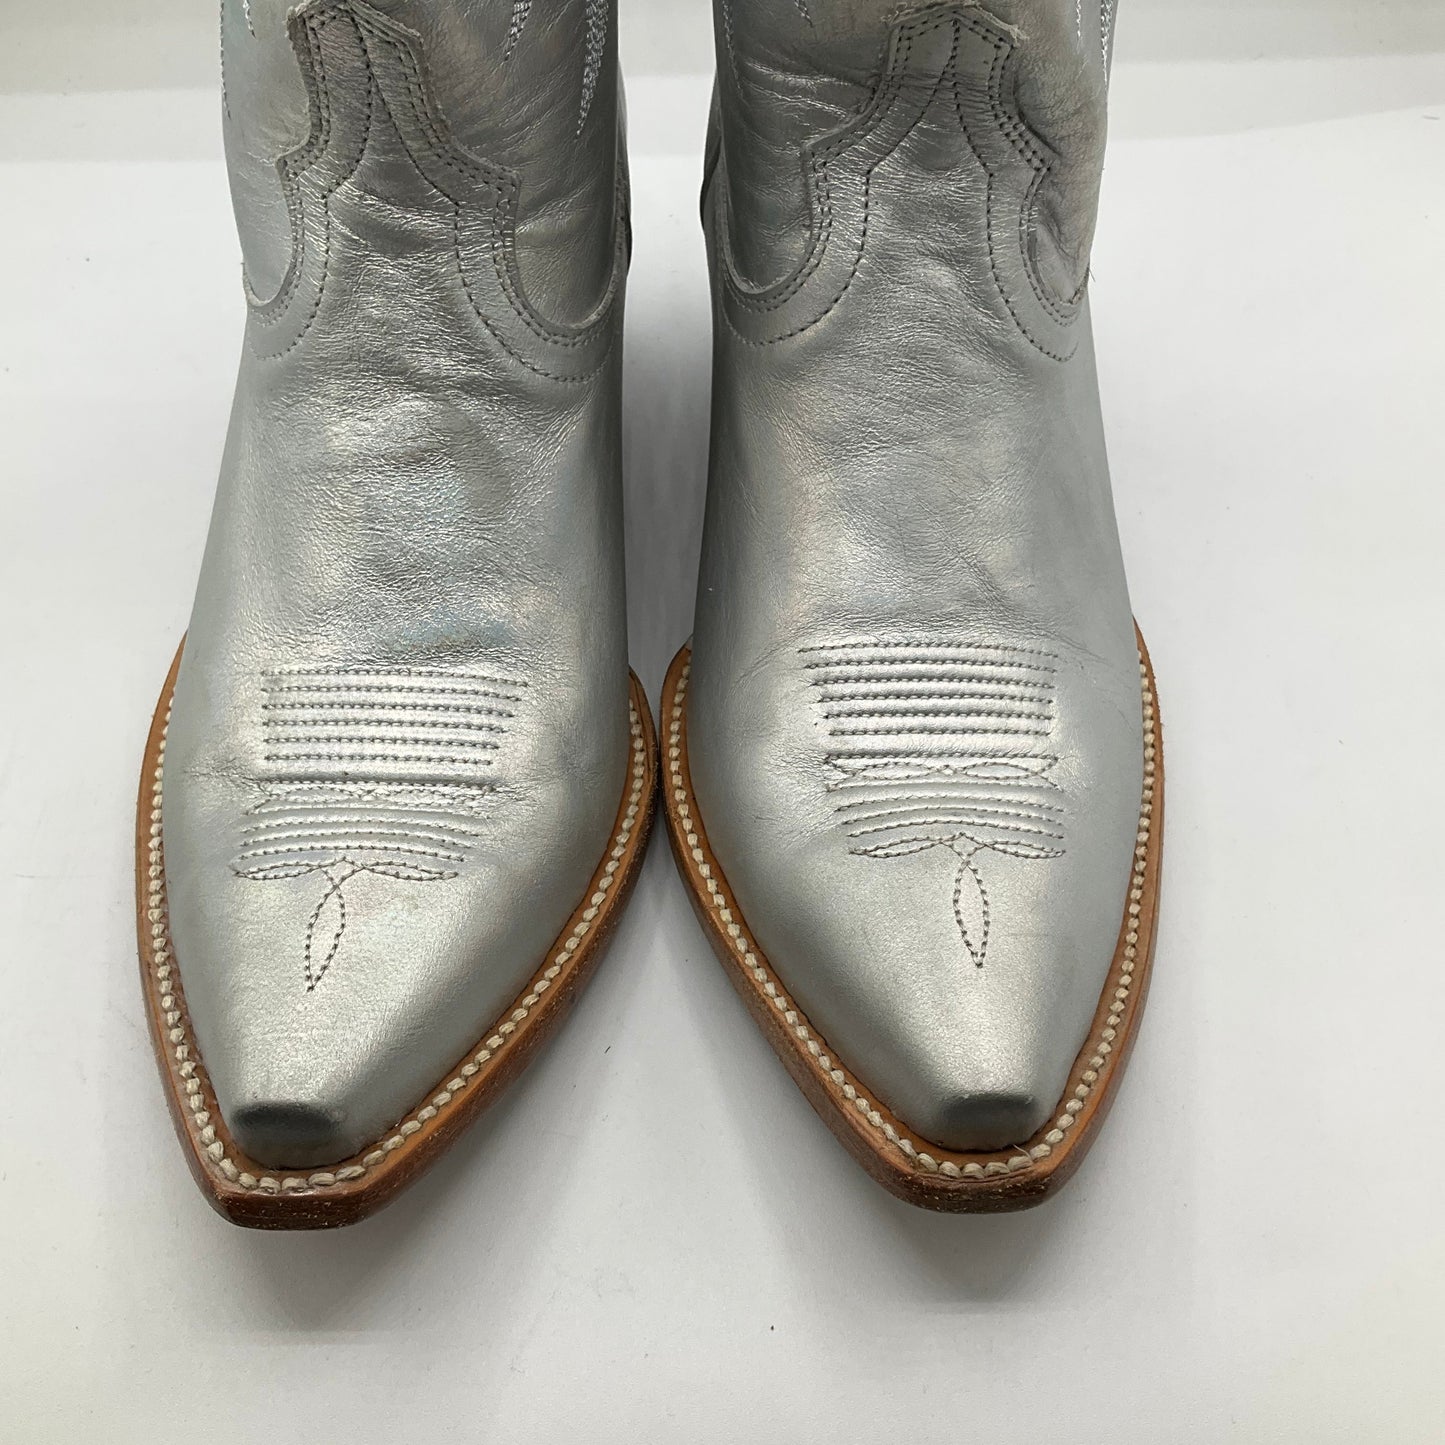 Silver Boots Western Cmb, Size 9